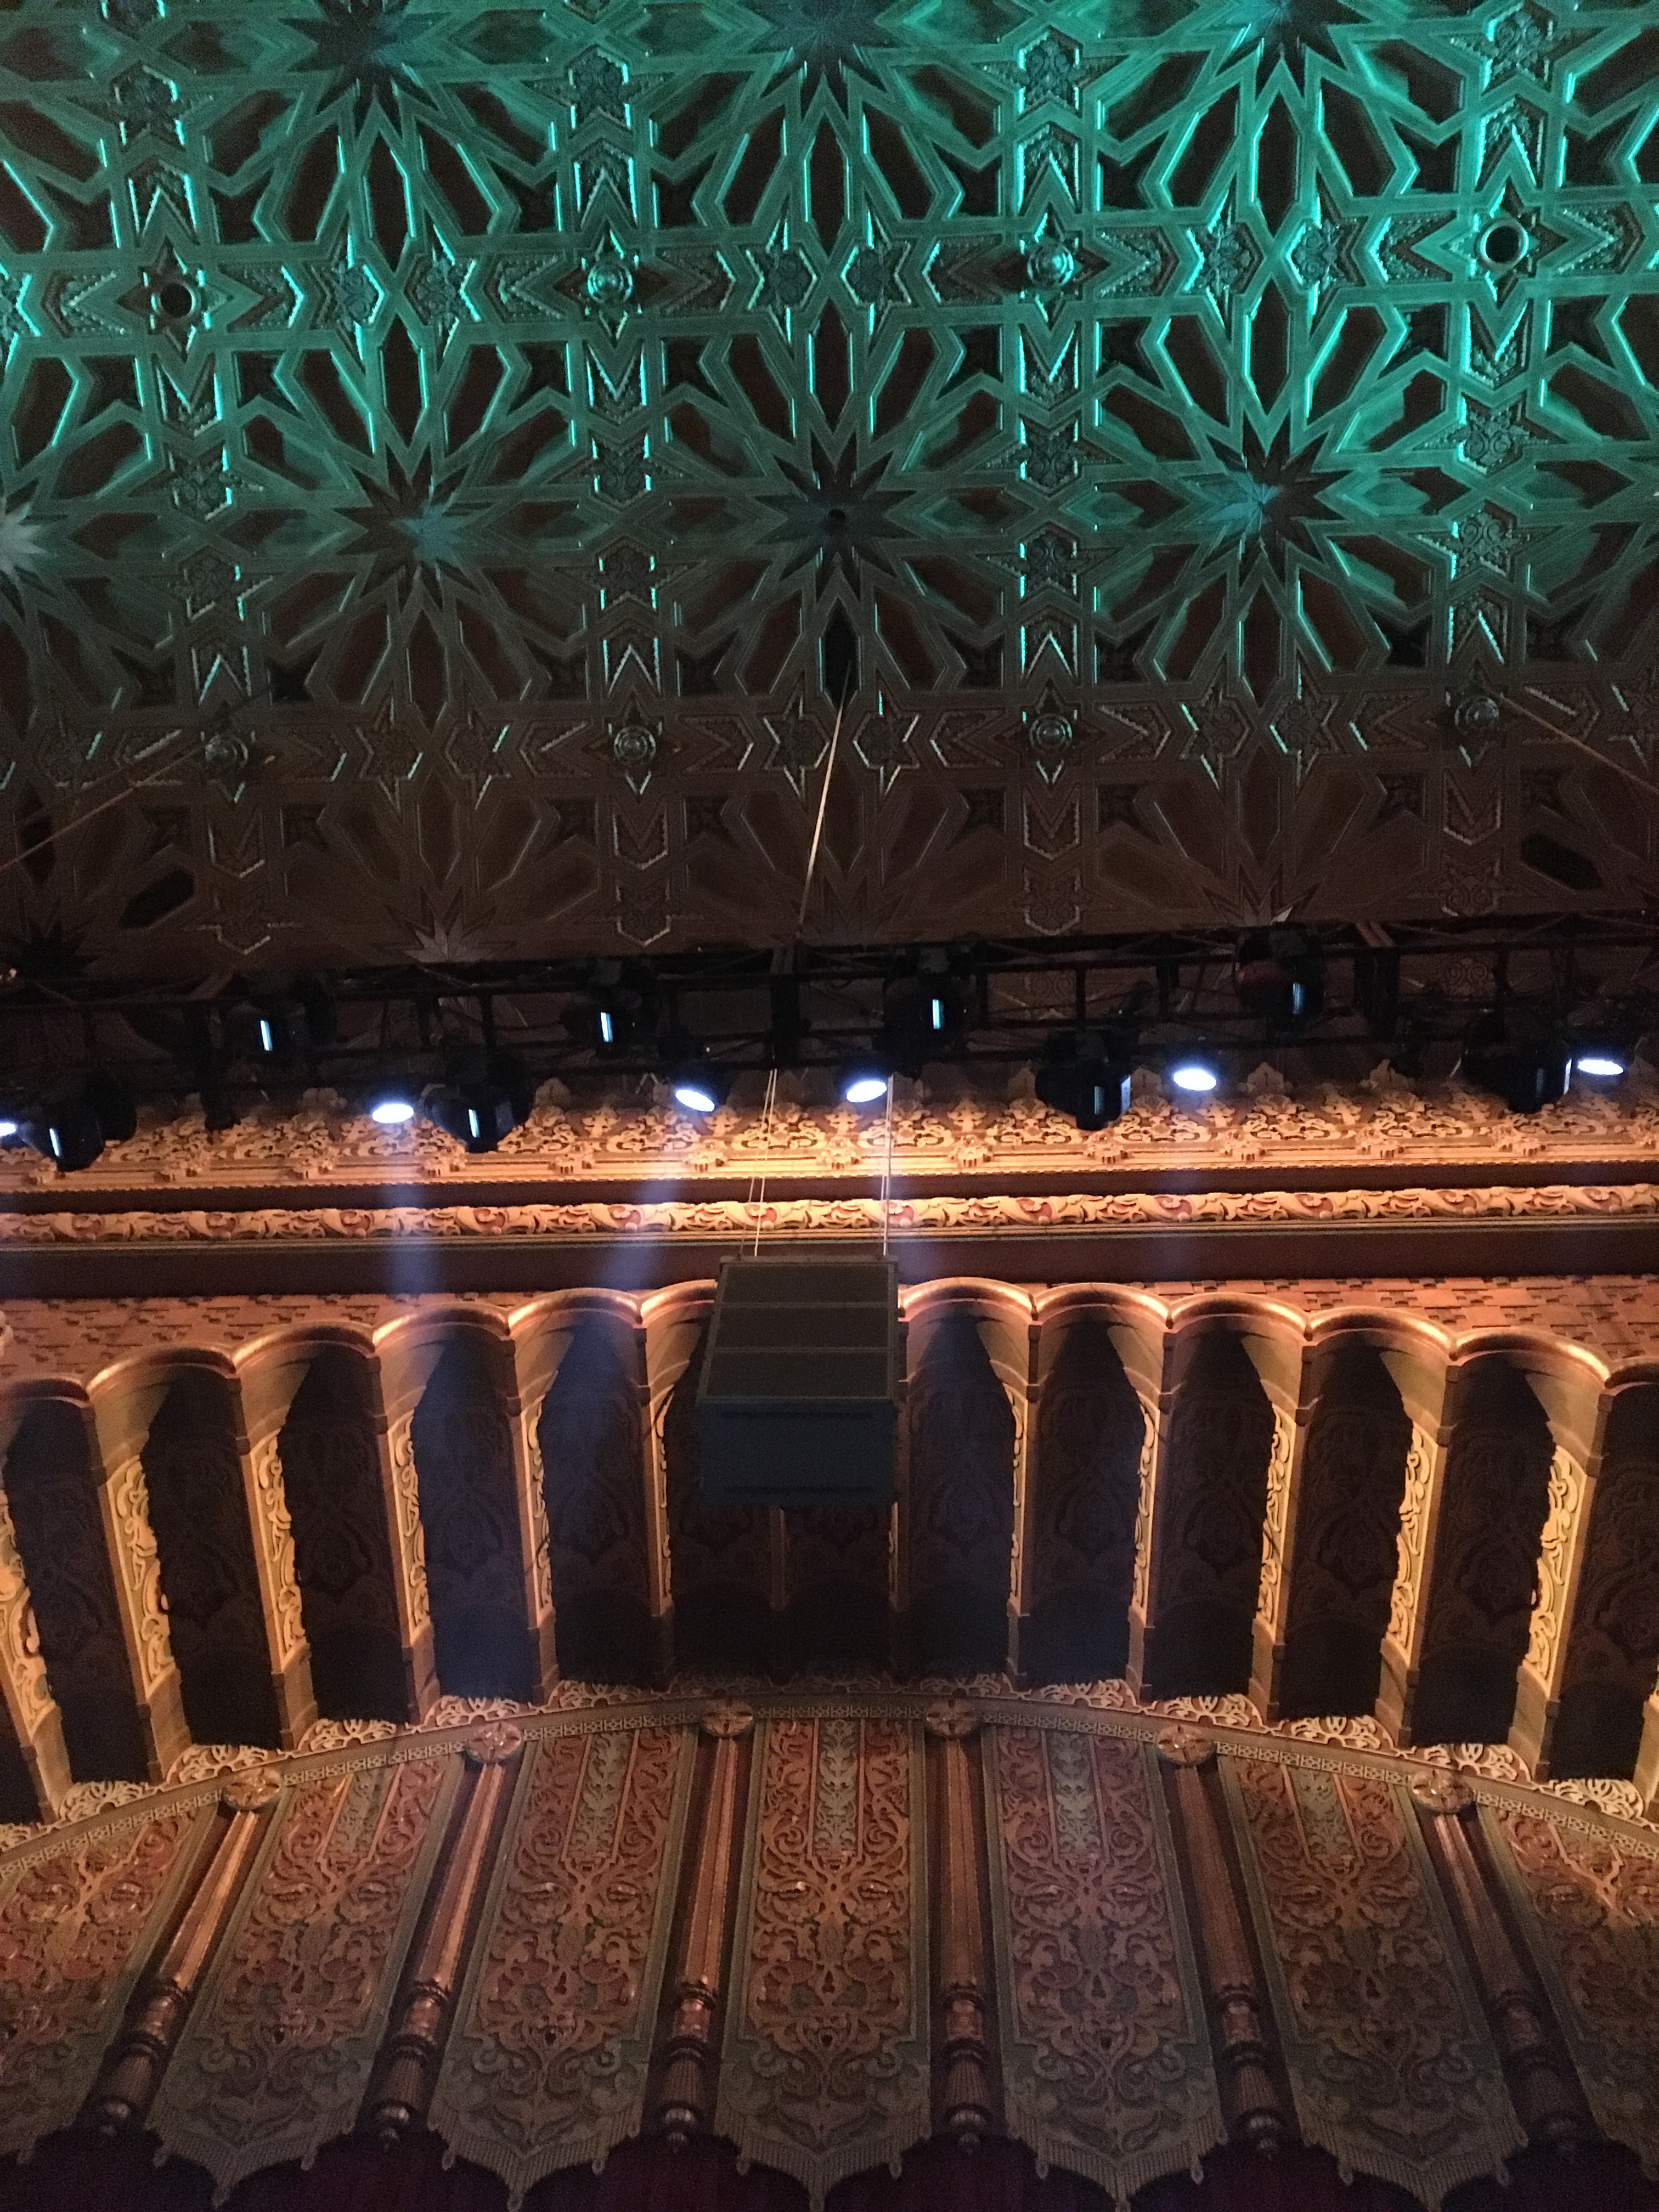 View of the ceiling of the Fox Theater in Oakland, CA